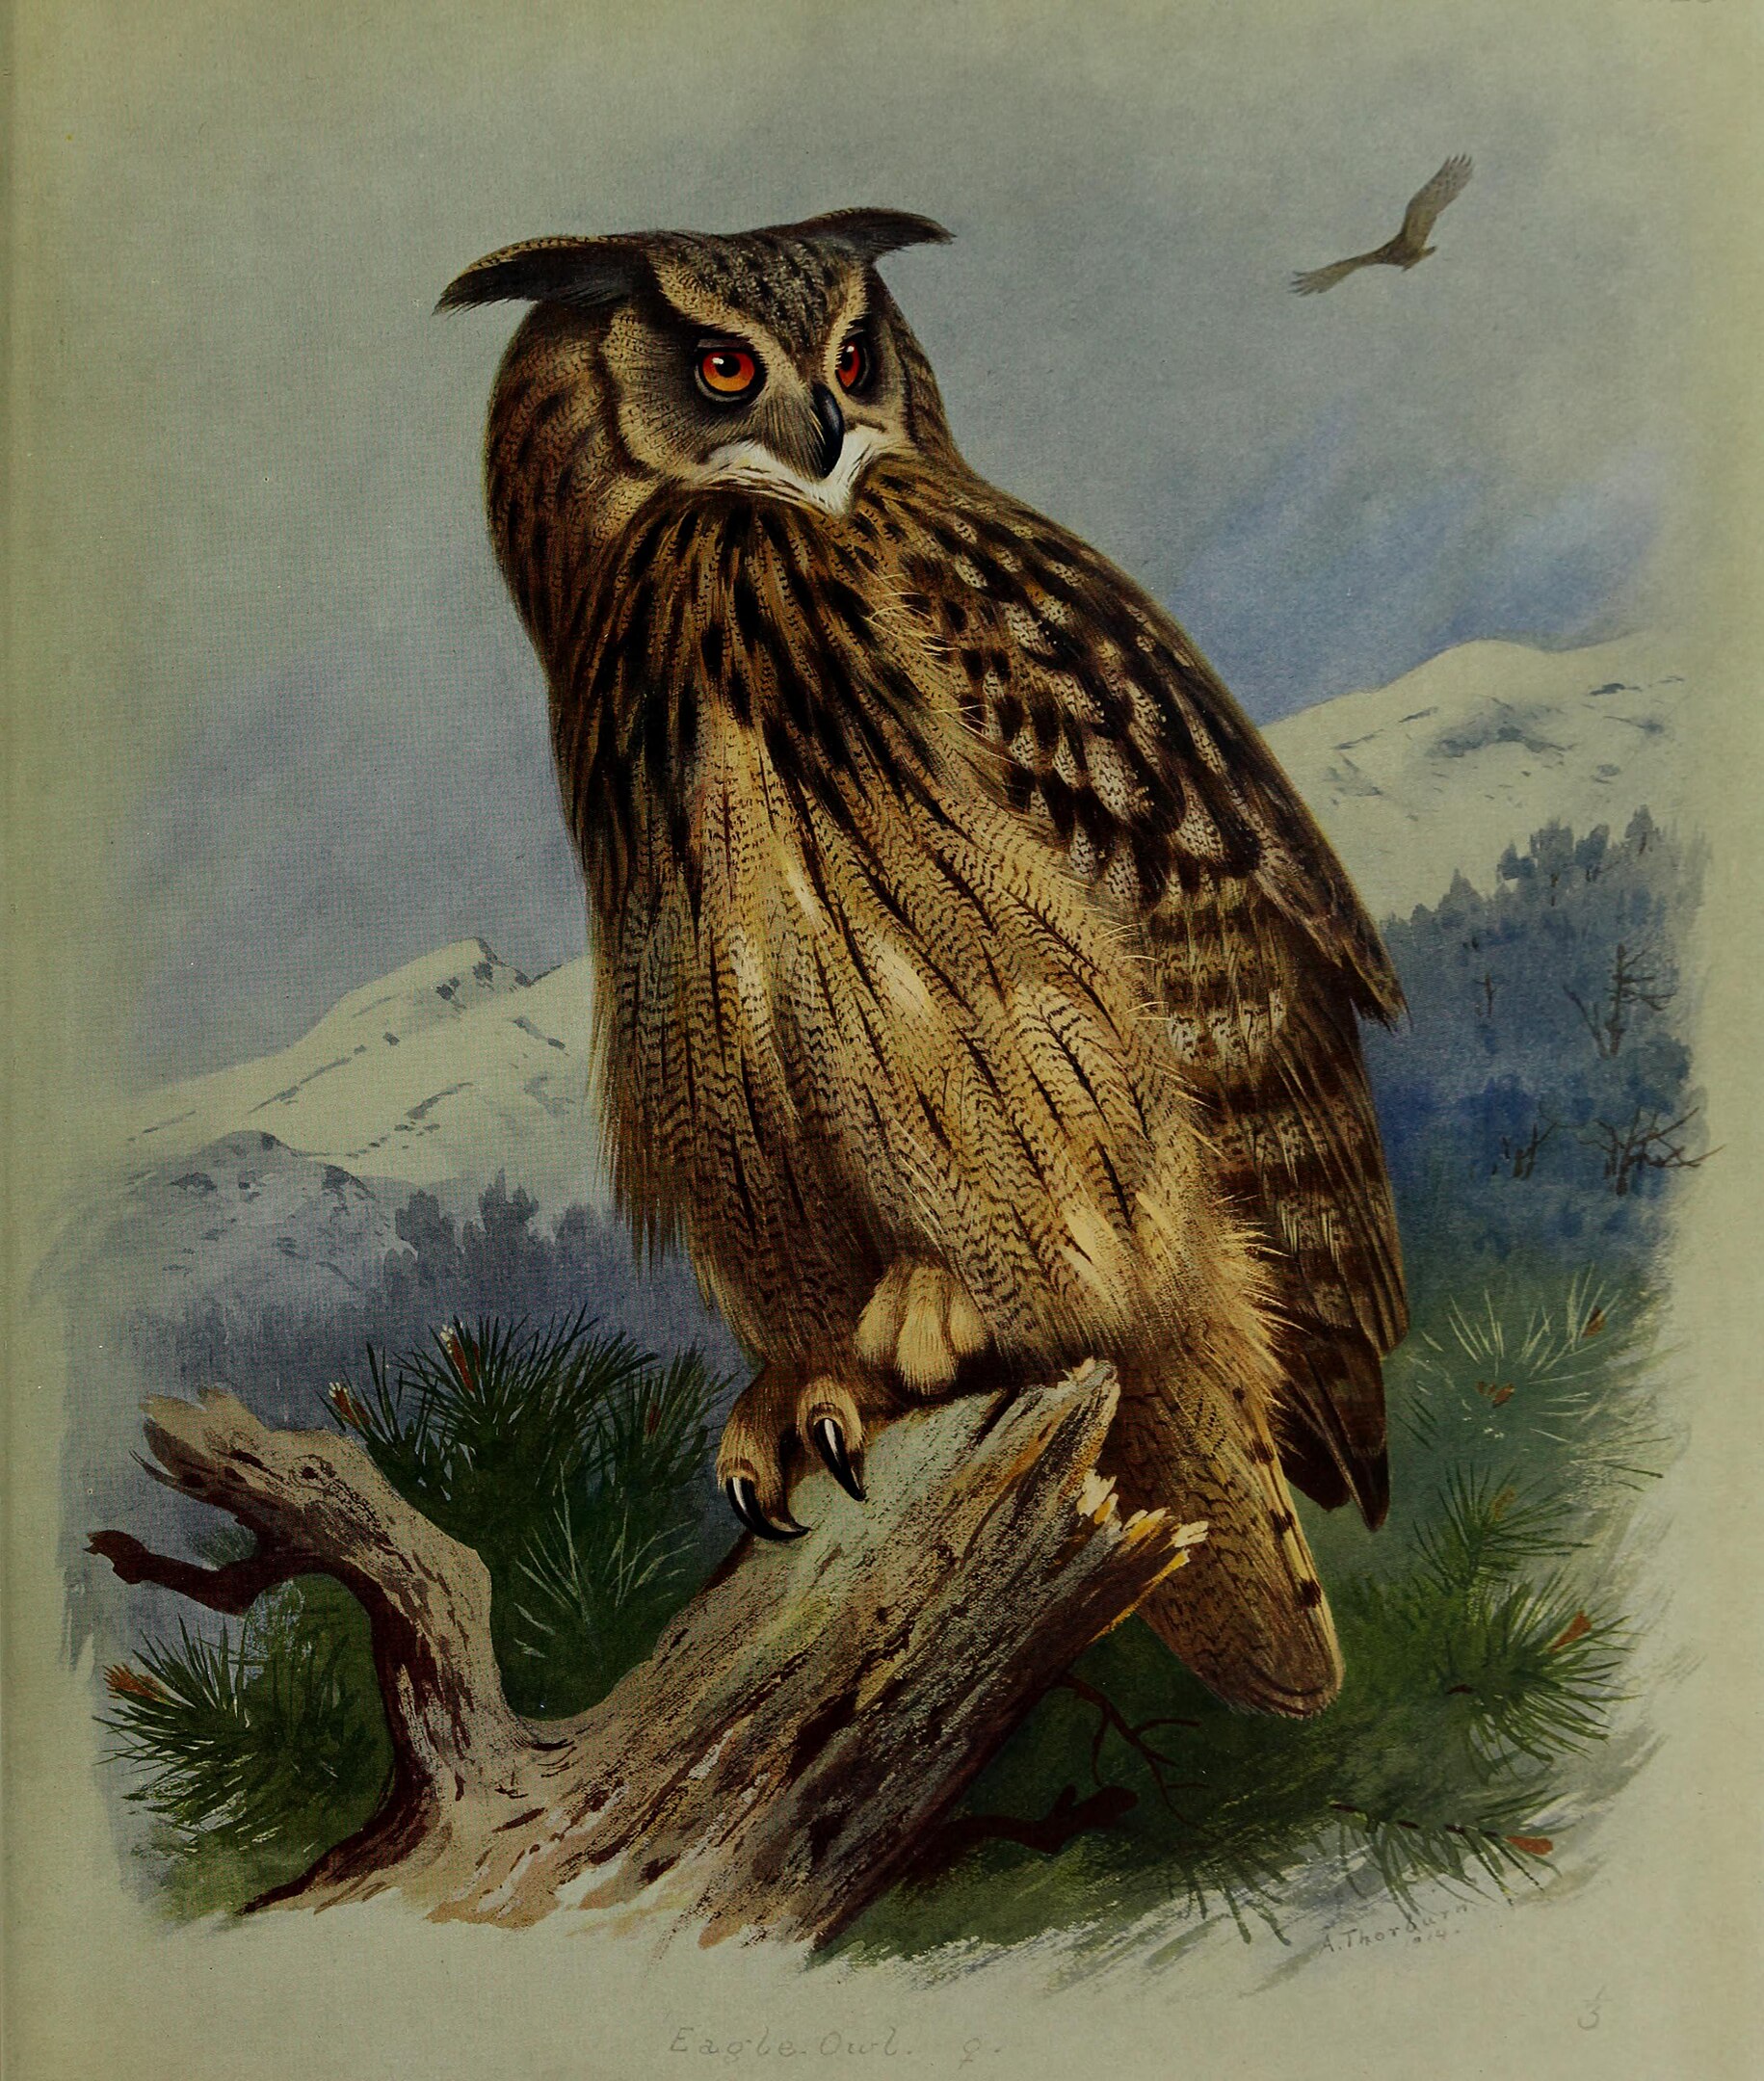 An illustration of an eagle-owl on a tree branch